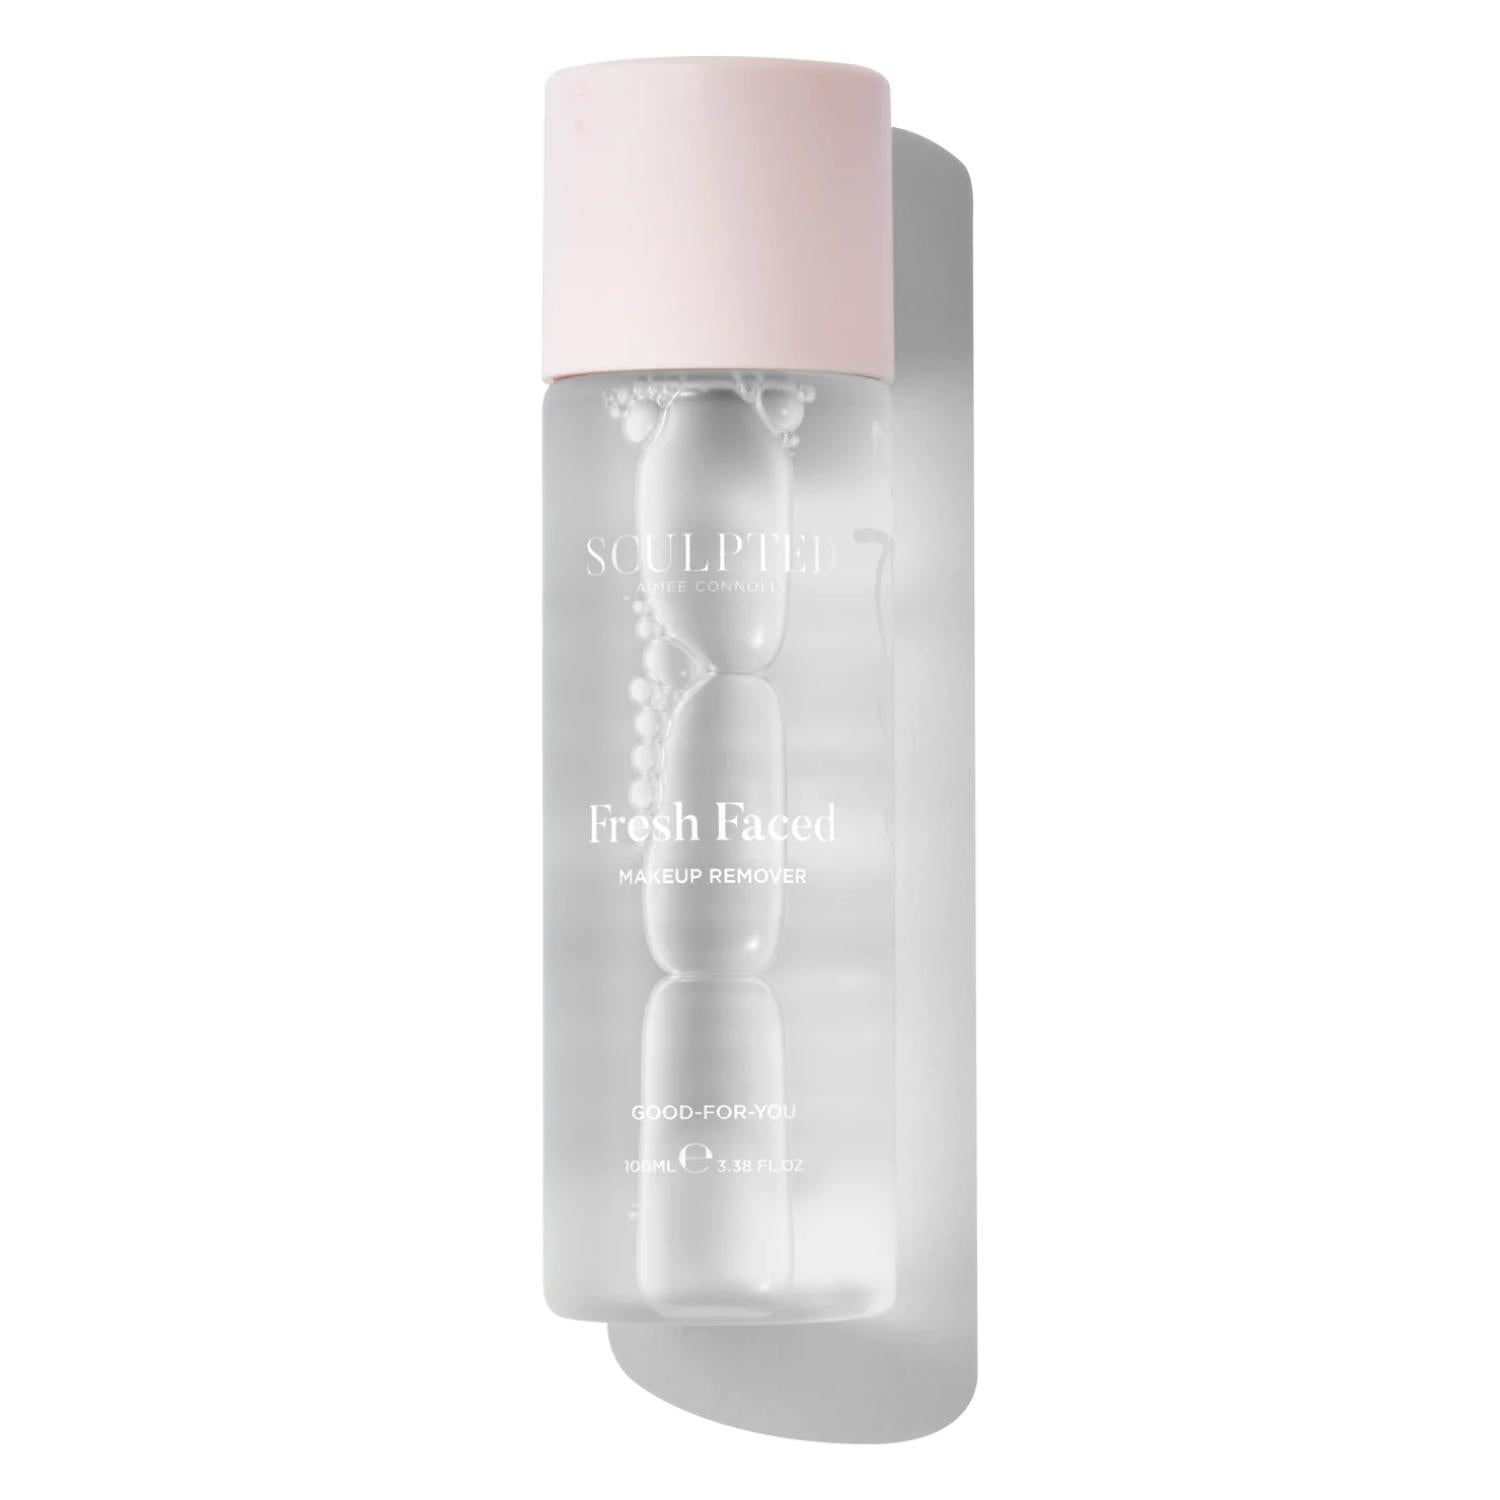 Sculpted Fresh Faced Cleanser 100ml 2 Shaws Department Stores